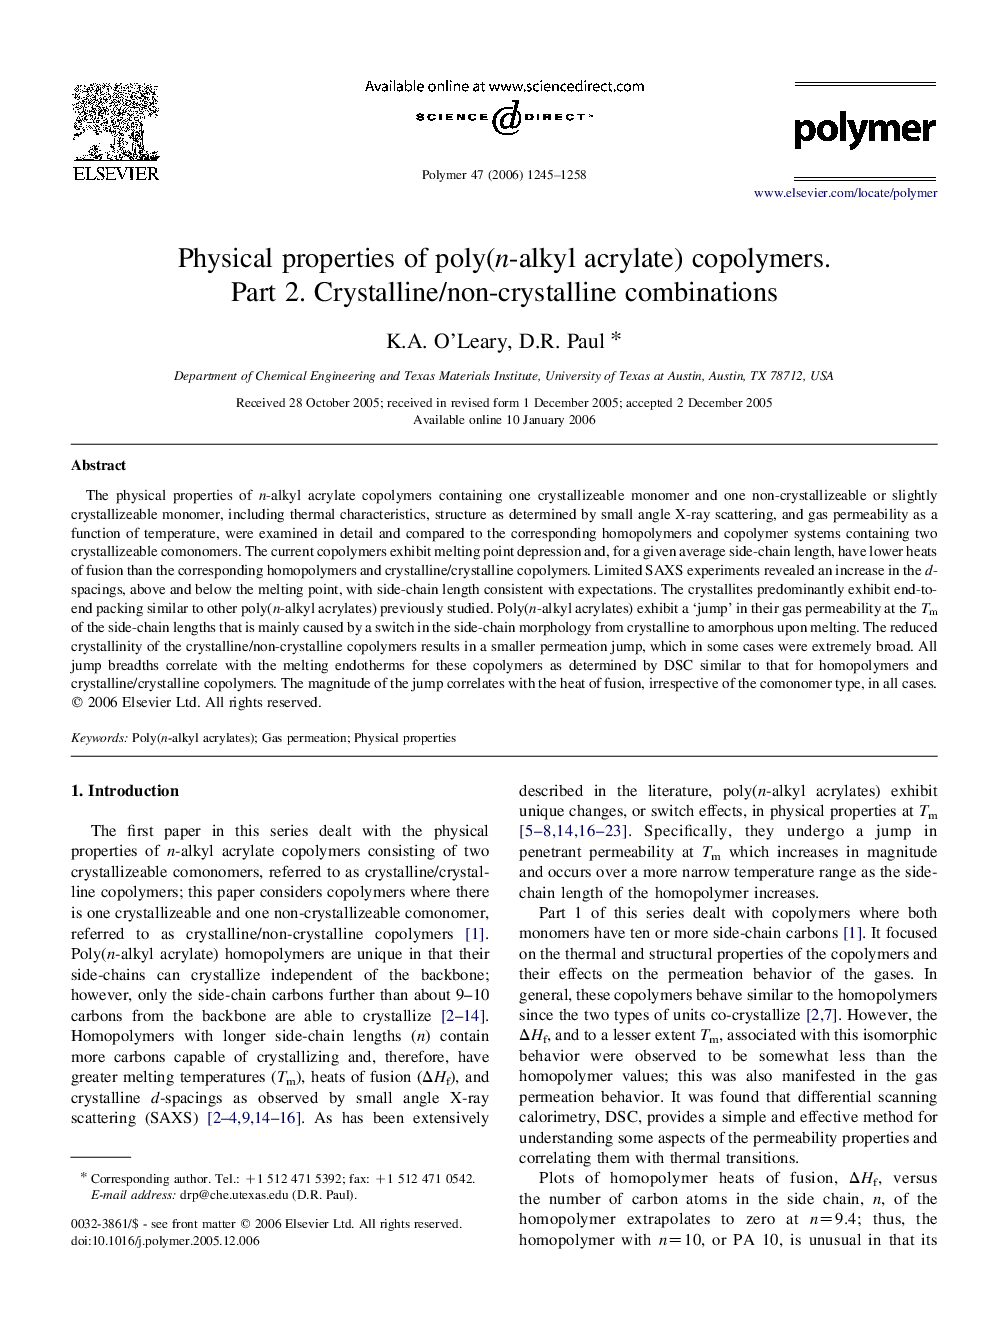 Physical properties of poly(n-alkyl acrylate) copolymers. Part 2. Crystalline/non-crystalline combinations